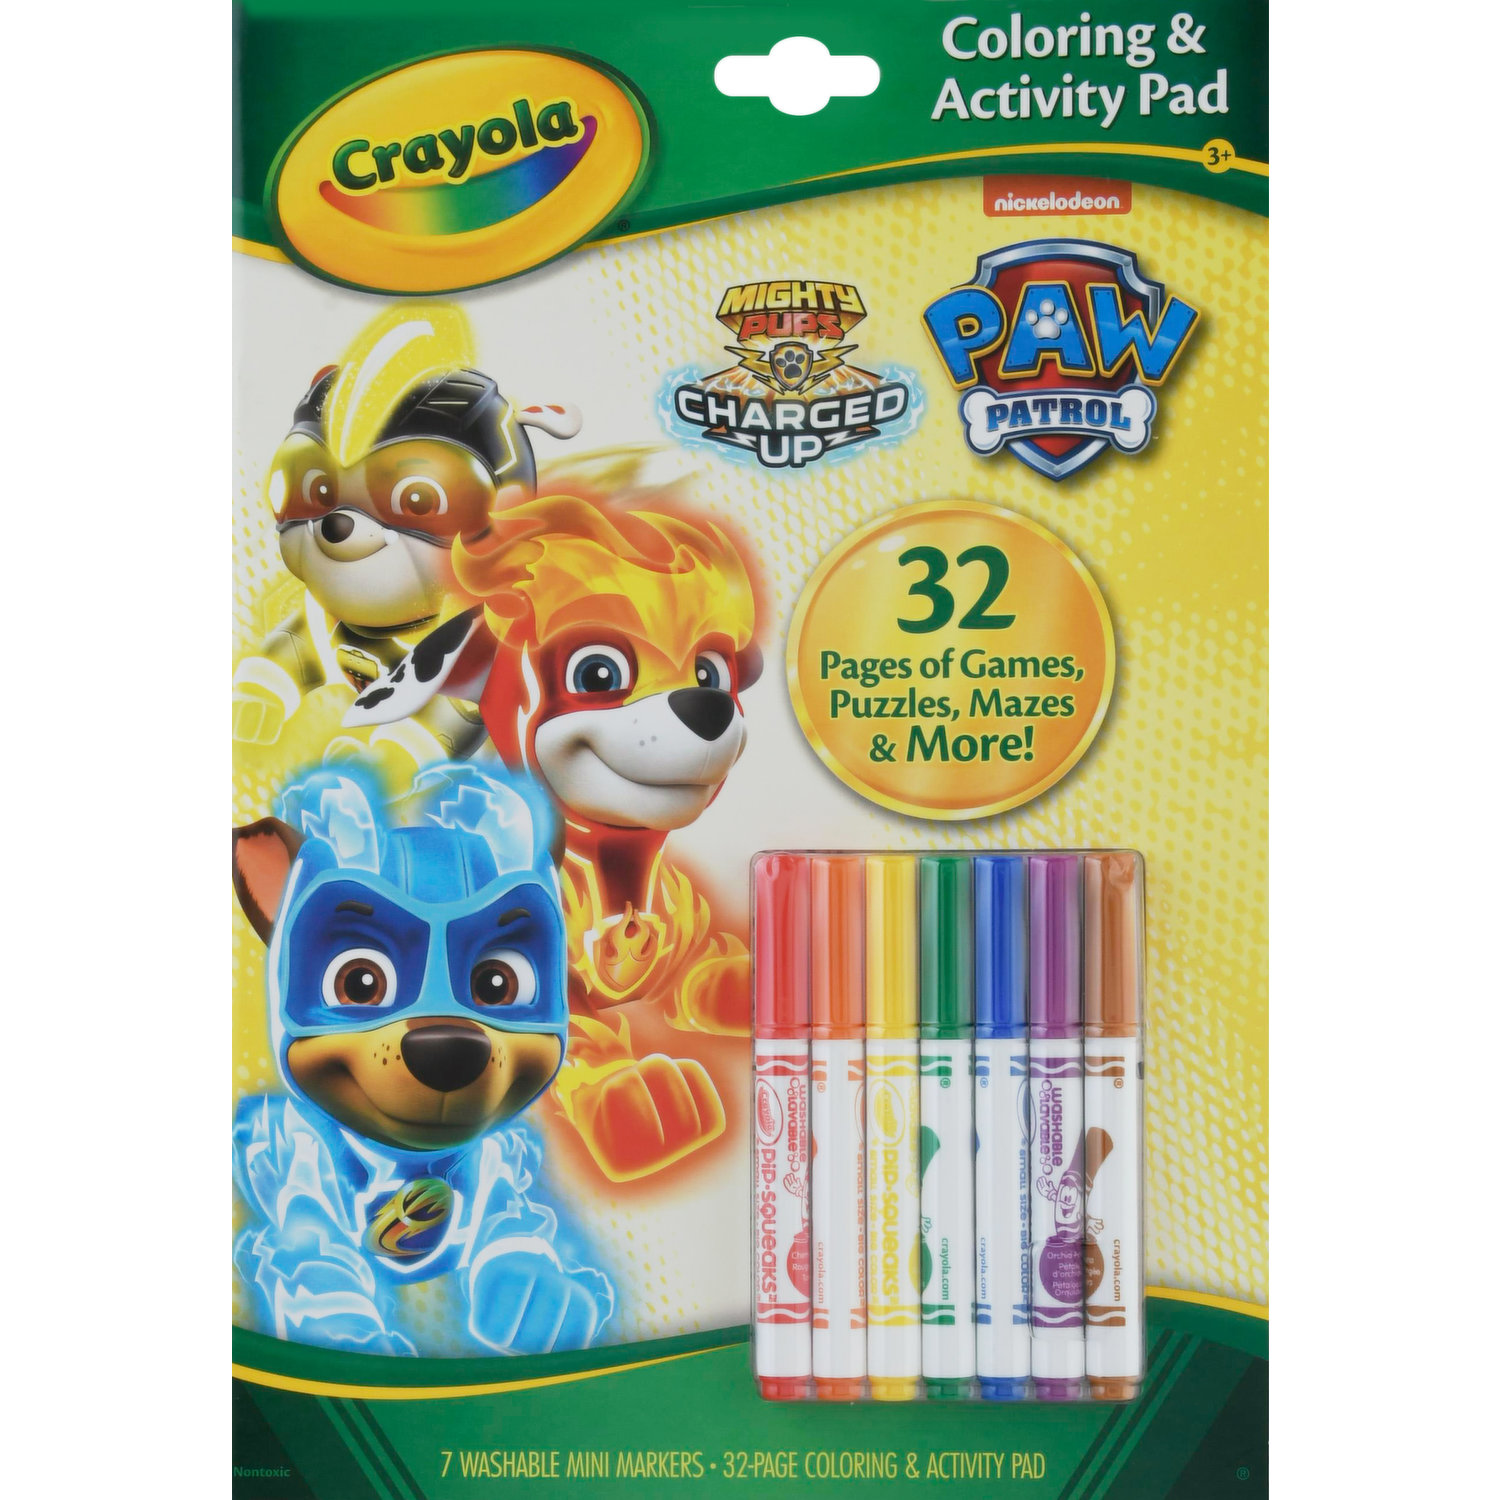 crayola giant coloring pages nickelodeon paw patrol mighty pups